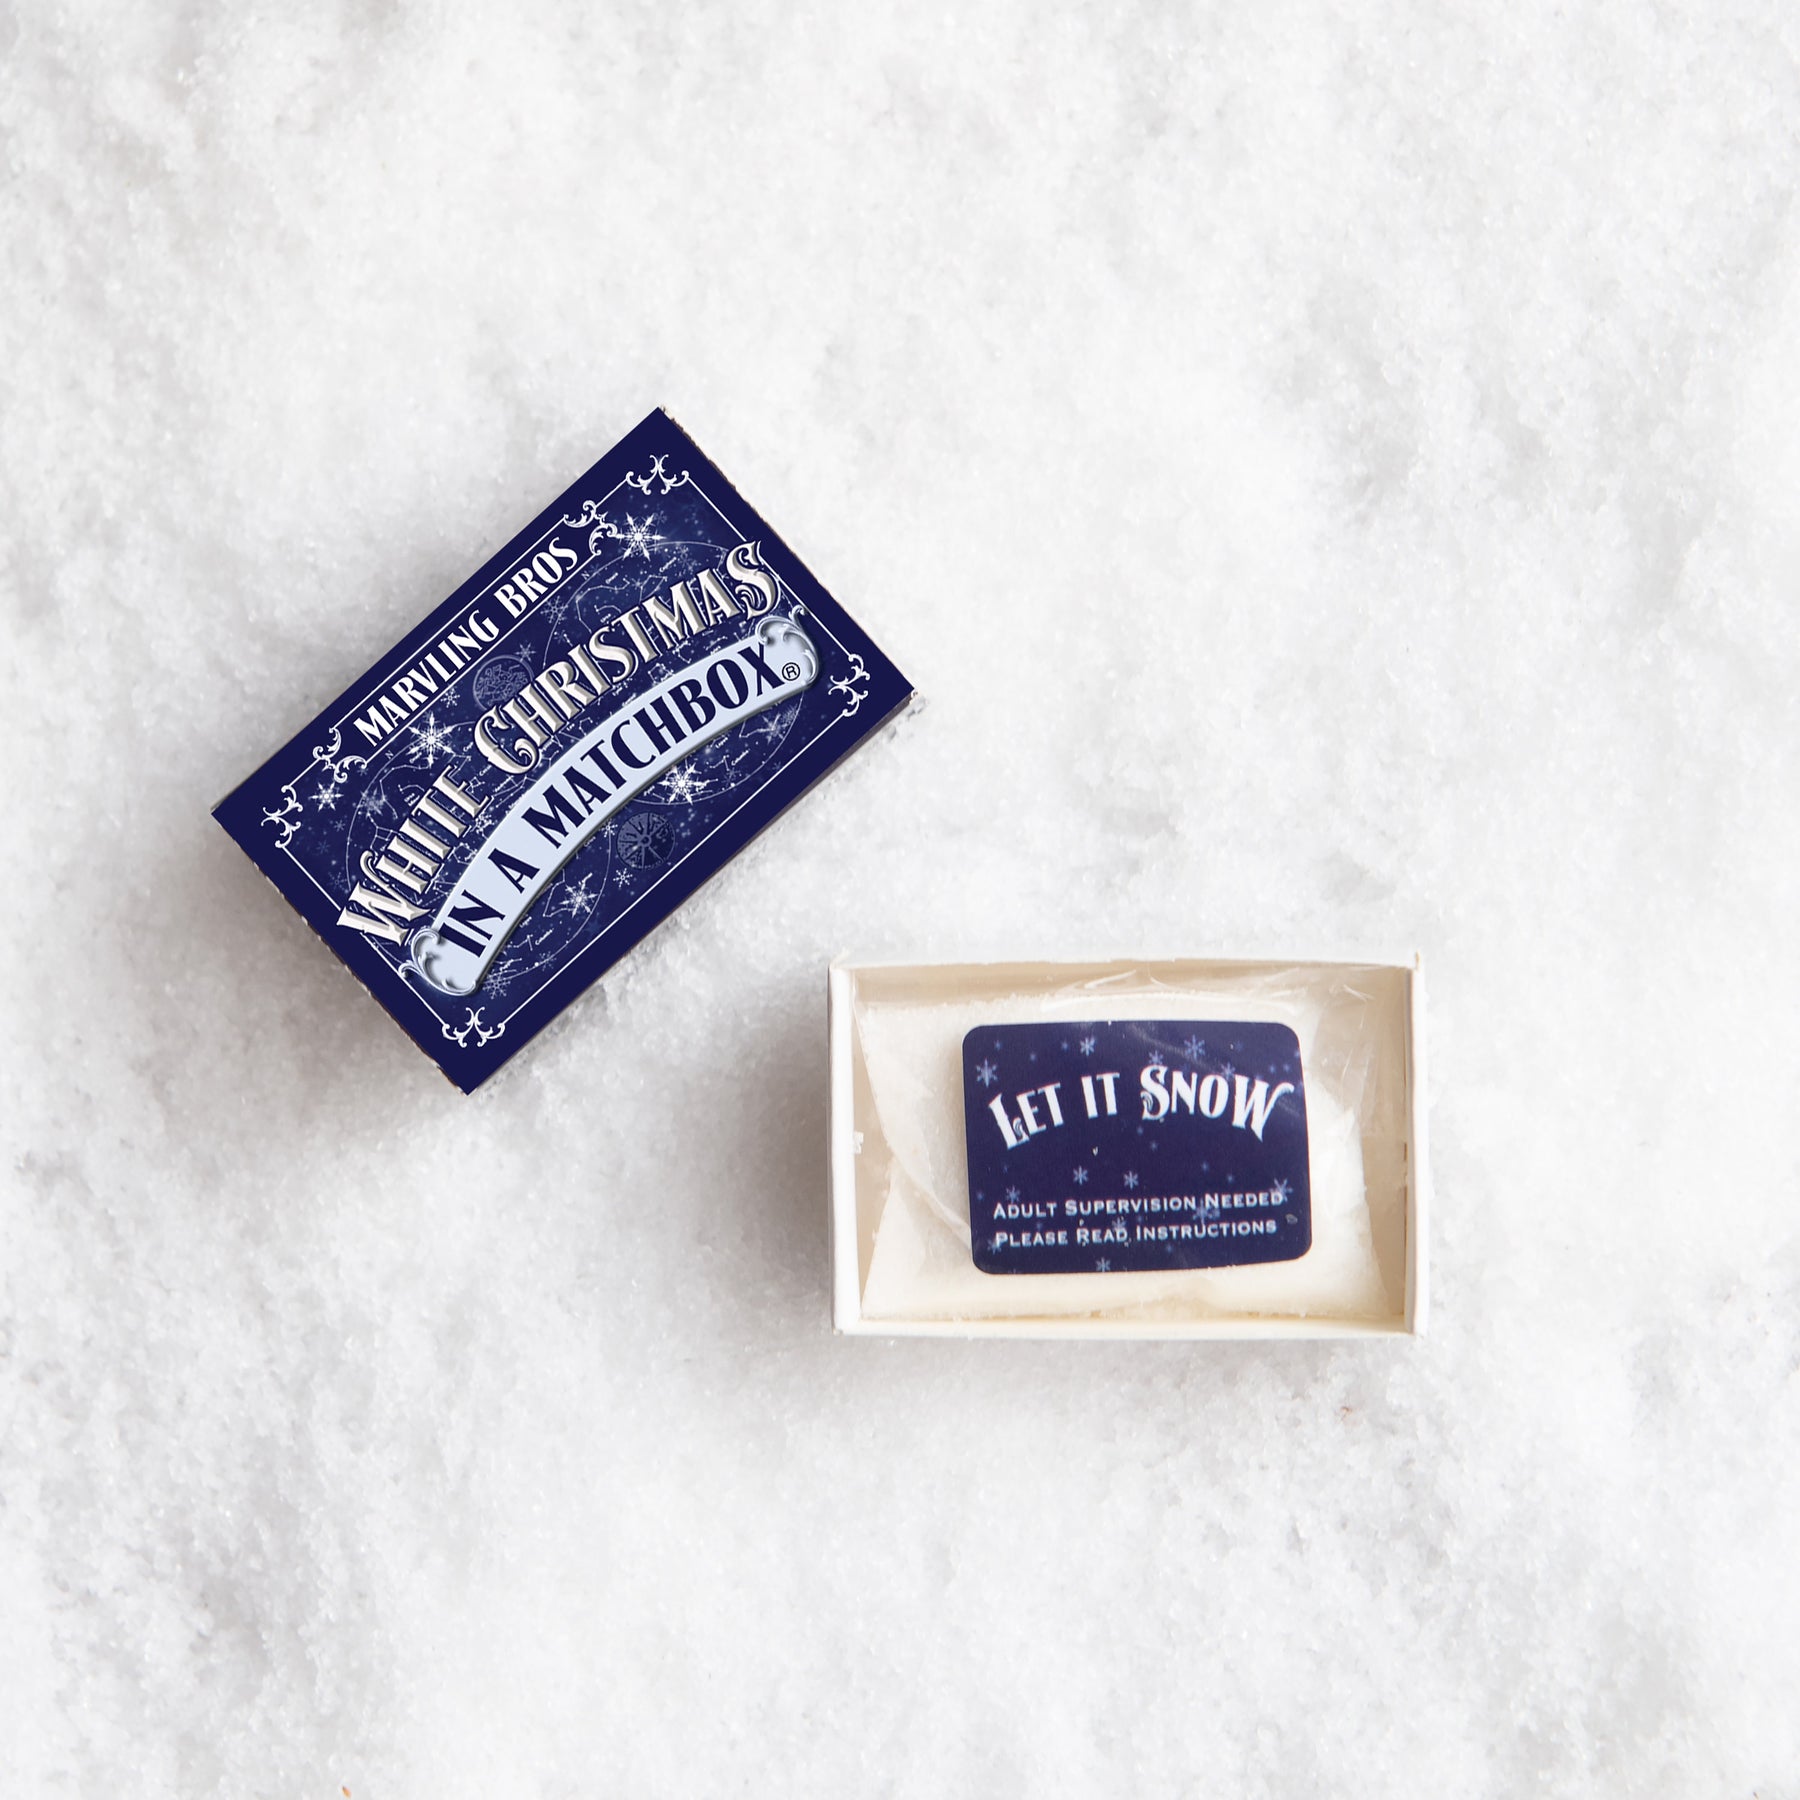 White Christmas In A Matchbox